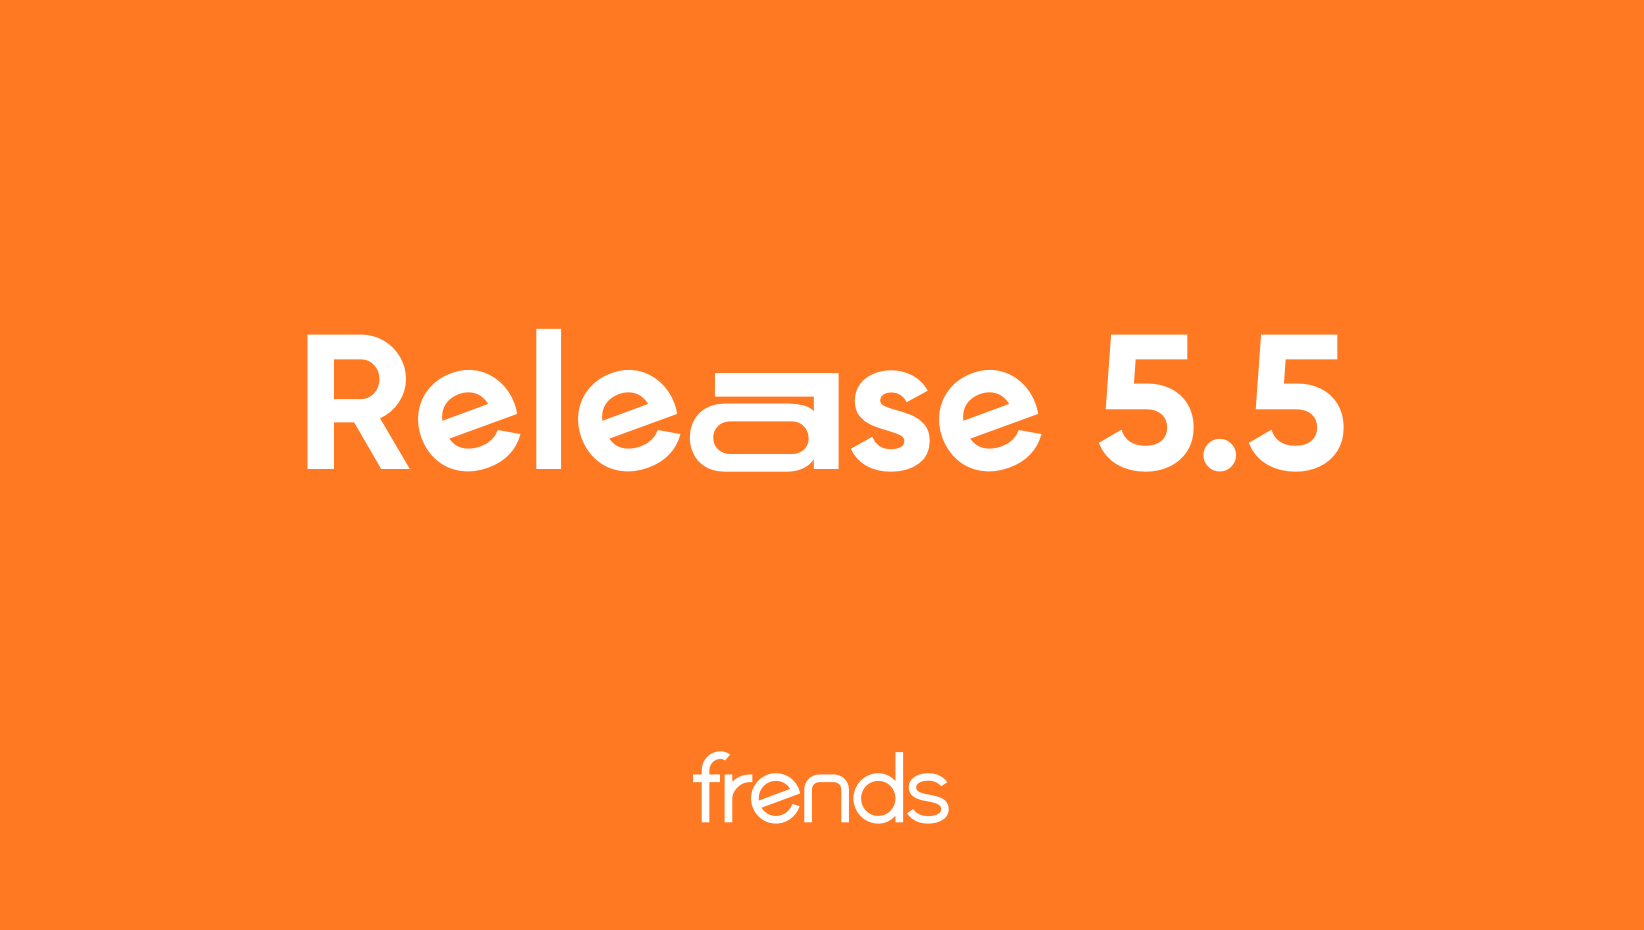 Release 5.5